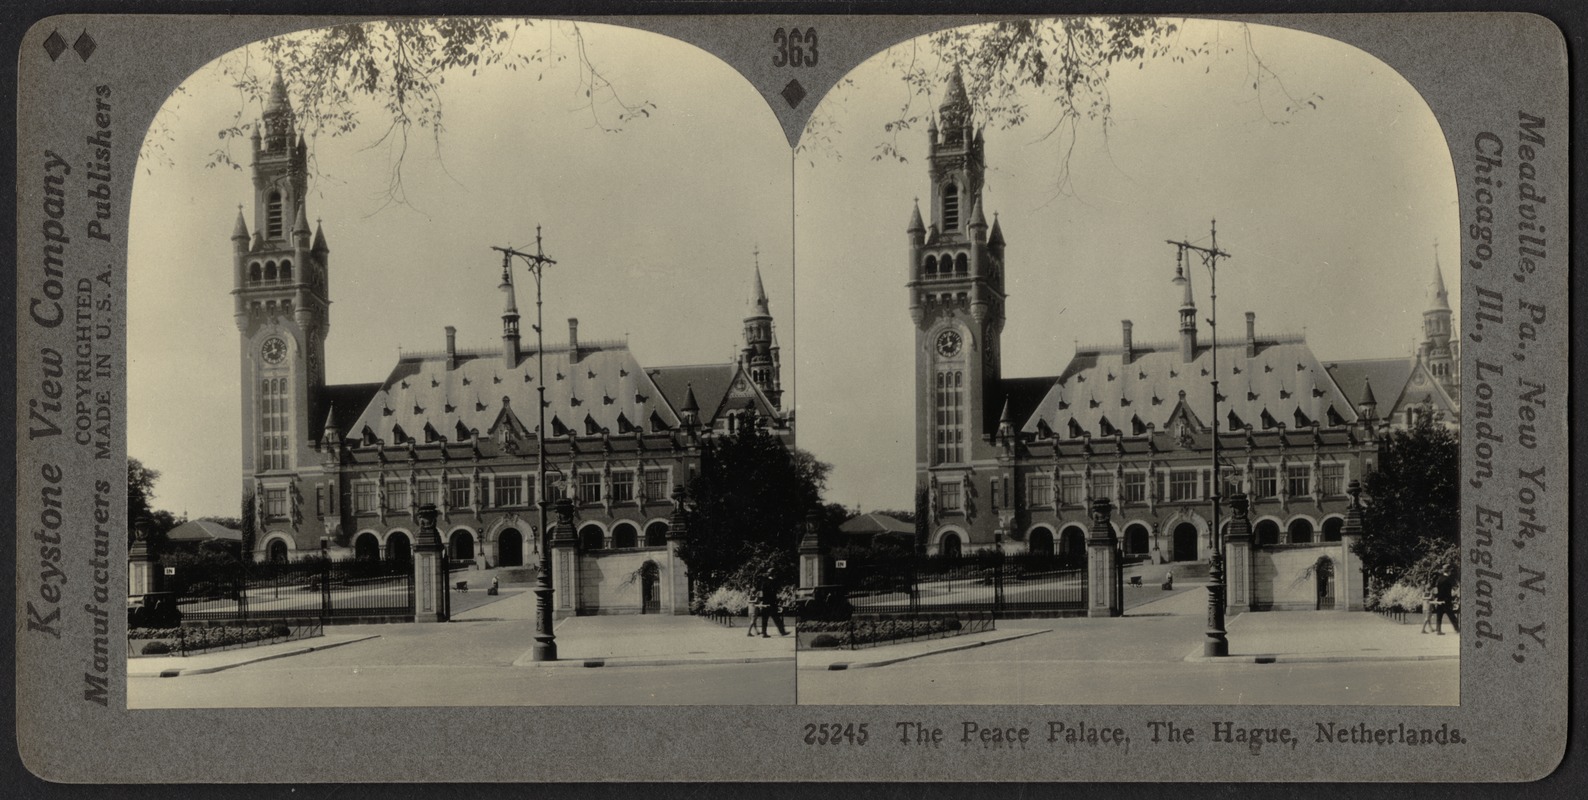 The peace palace, The Hague, Netherlands